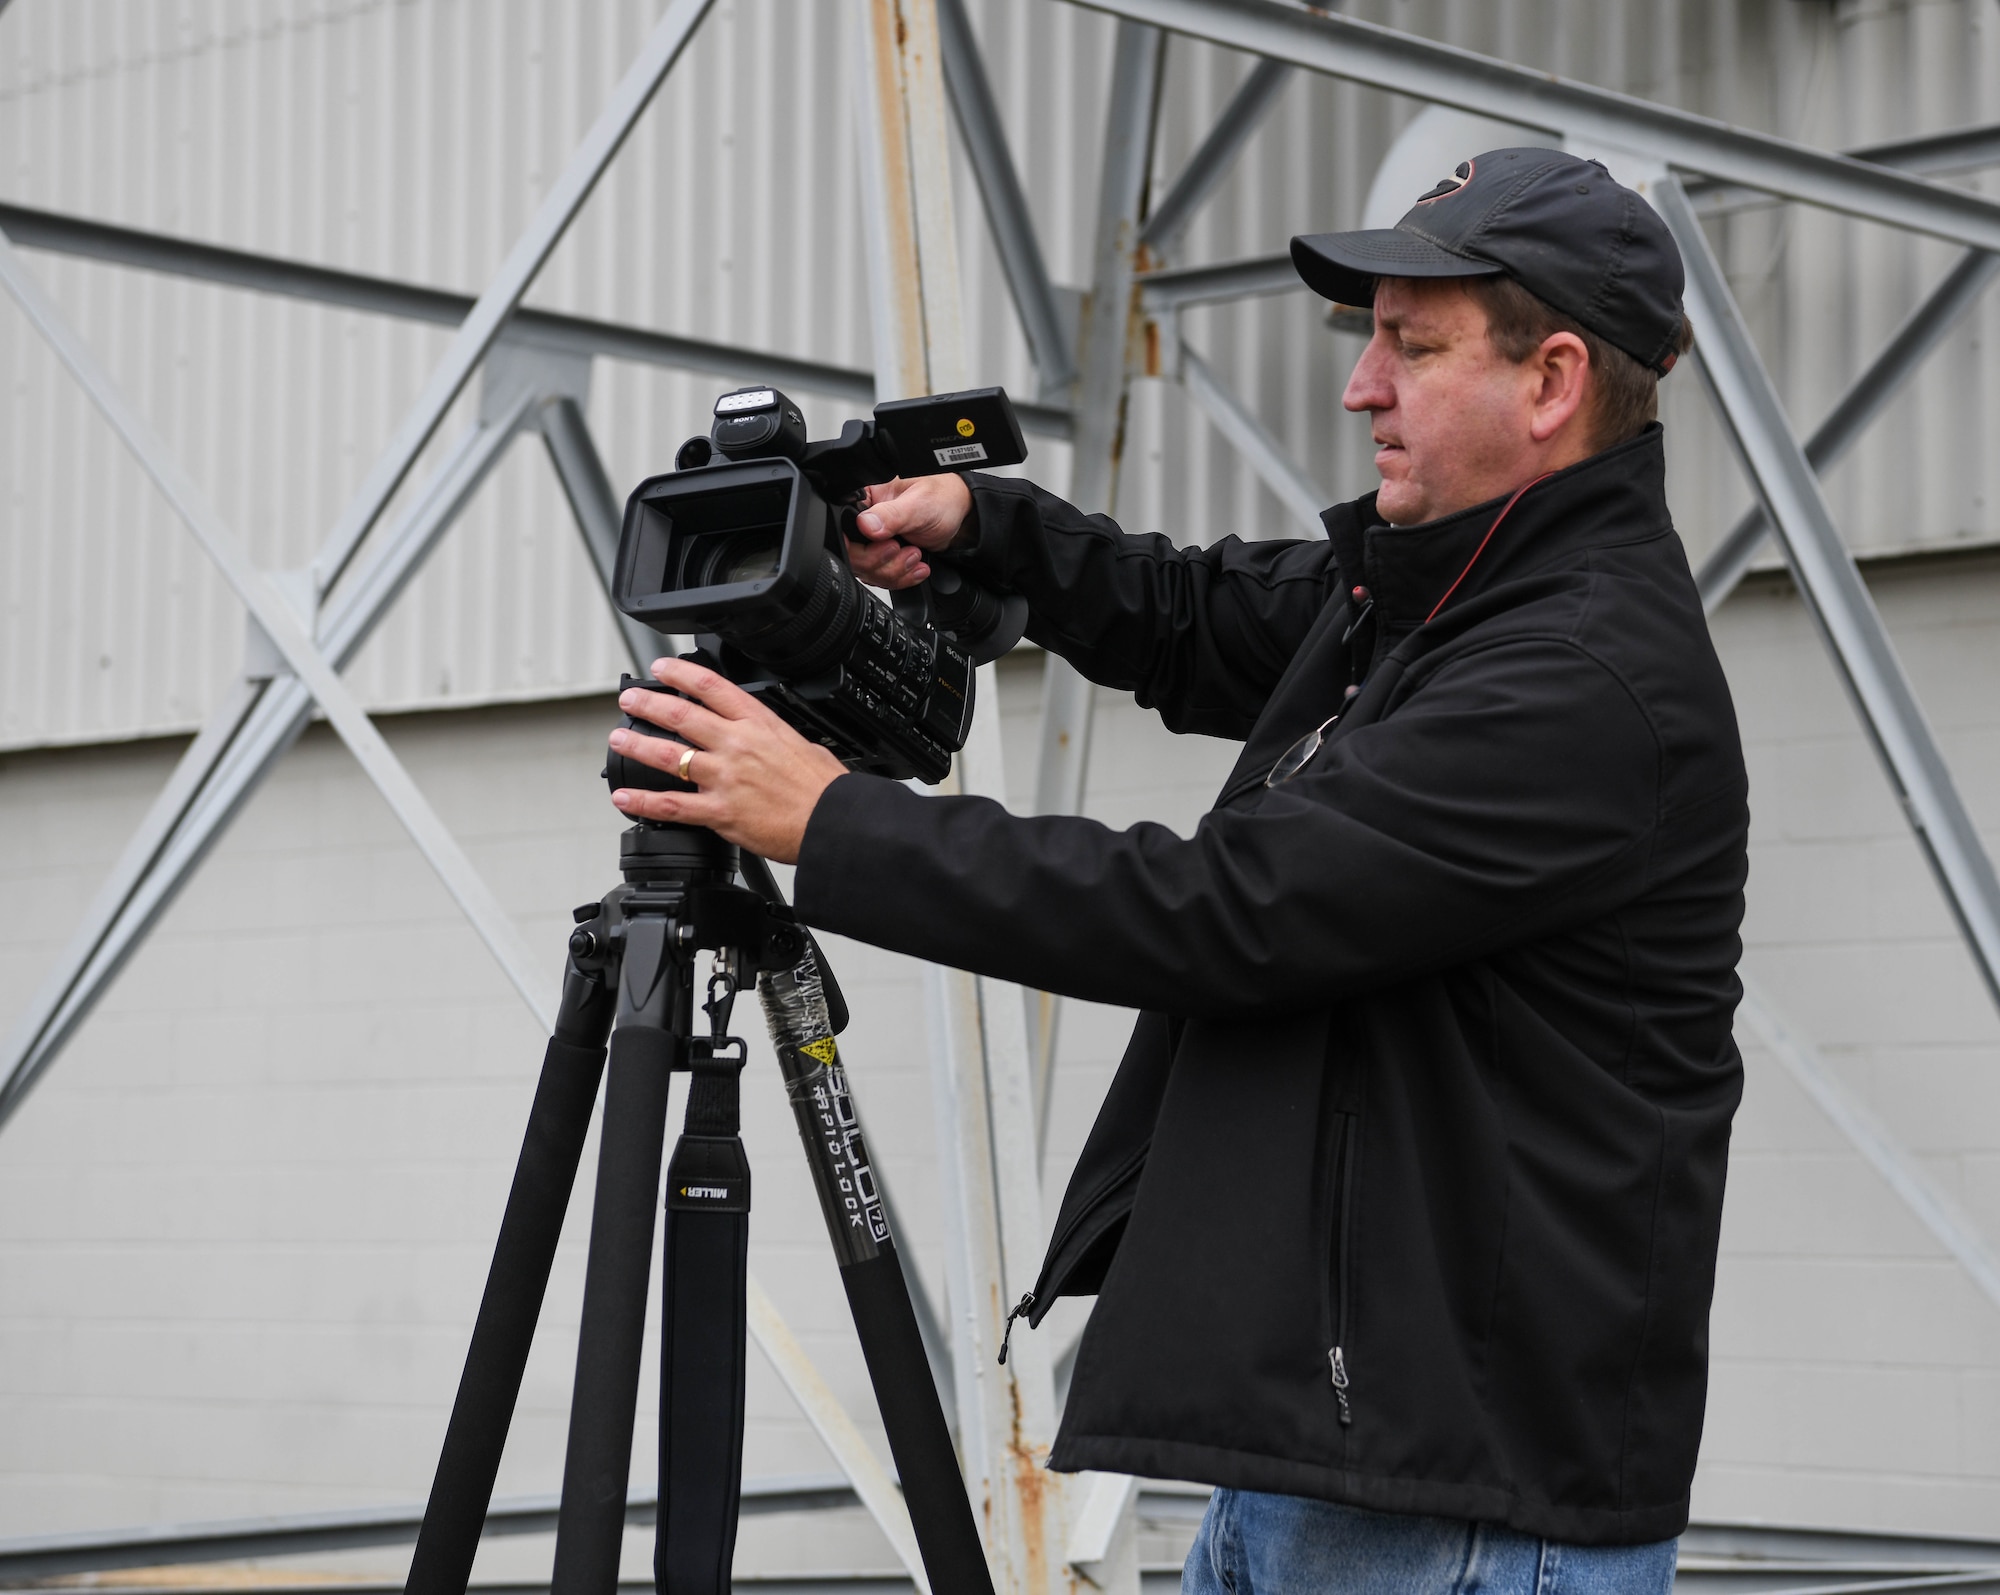 David Wright, a videographer for Arnold Engineering Development Complex, sets up his camera to capture video in support of the AEDC test mission, Dec. 14, 2020, at Arnold Air Force Base, Tenn. When not putting his video and editing skills to use at Arnold, Wright spends his free time on other creative projects, such as writing fantasy fiction novels. (U.S. Air Force photo by Jill Pickett)